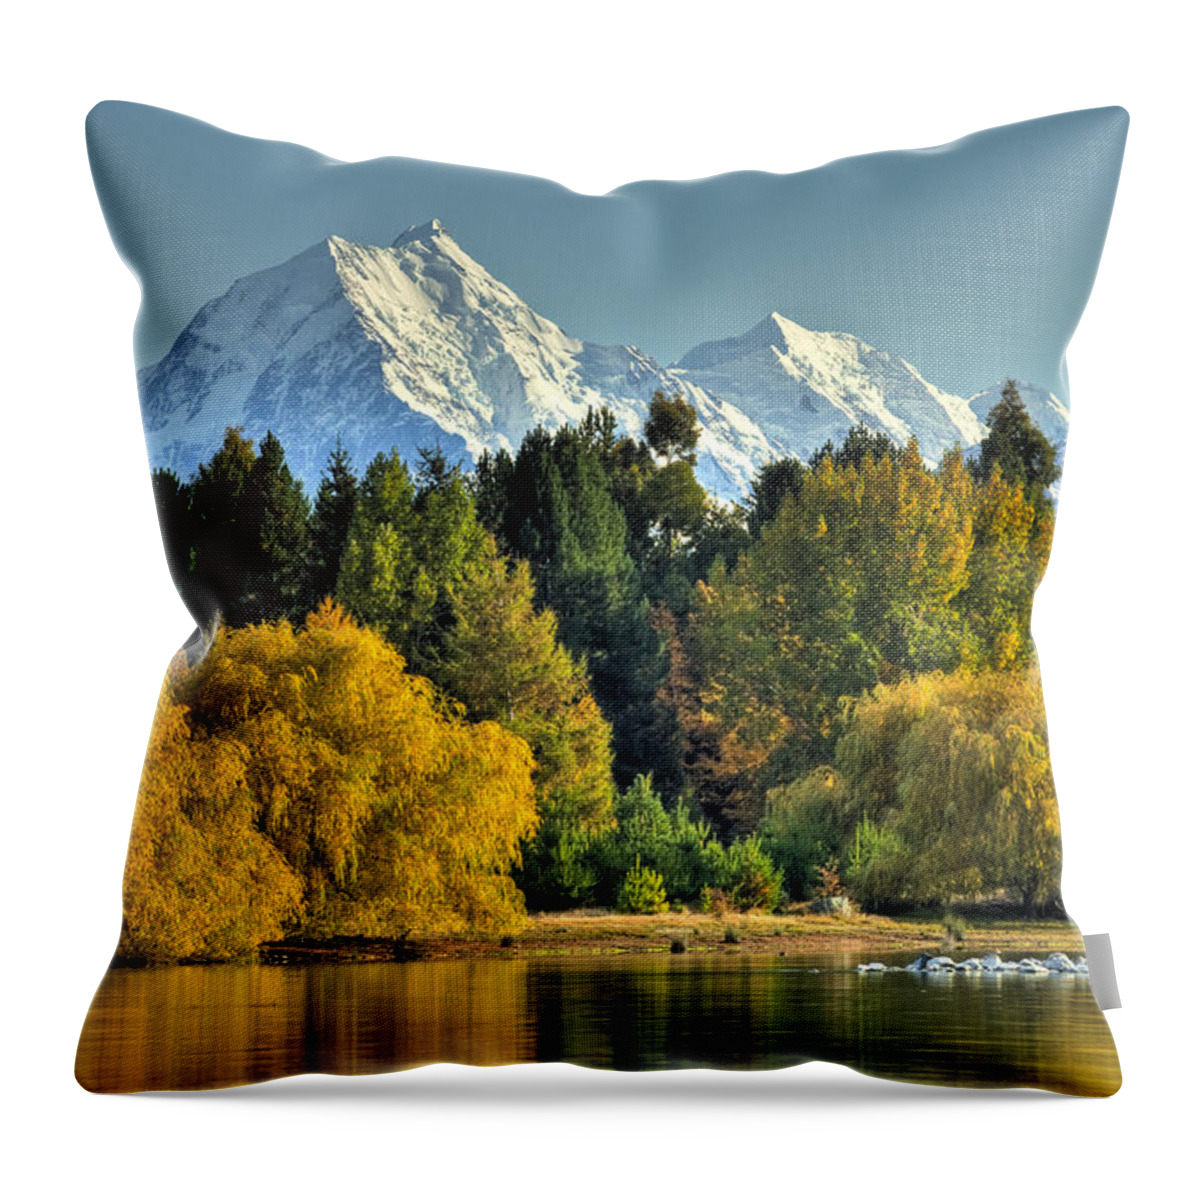 00462458 Throw Pillow featuring the photograph Fall Willow And Cottonwoods At Lake by Colin Monteath